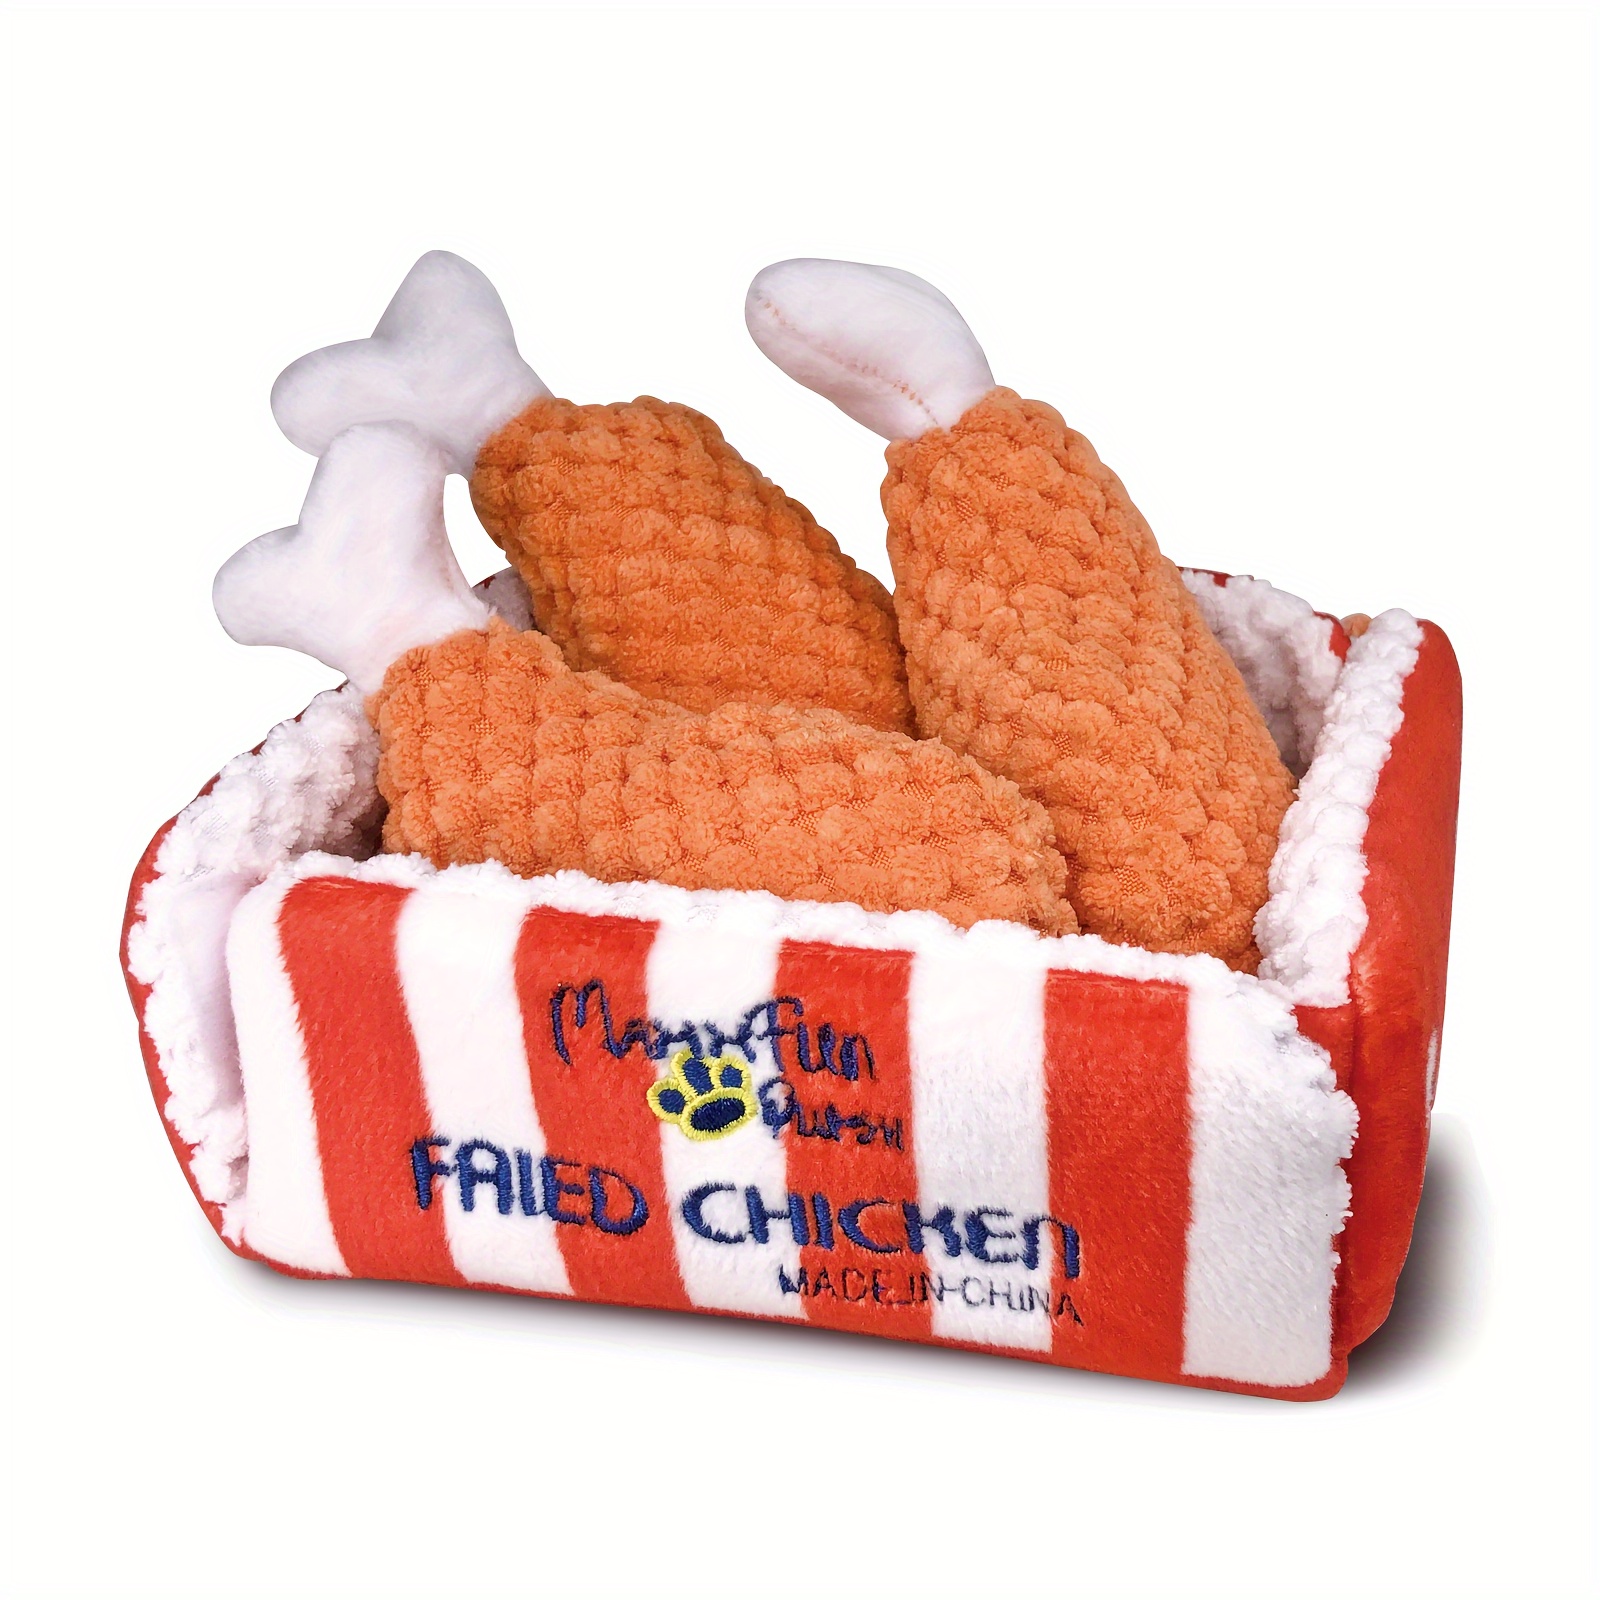 

Plush Dog Toys - Plush Fried Chicken Interactive Dog Toy - Parody Toy With Squeaker - Pet Game - Hide Treat Food Puzzle - Medium To Large Dog - Cute Dog Gifts Birthday